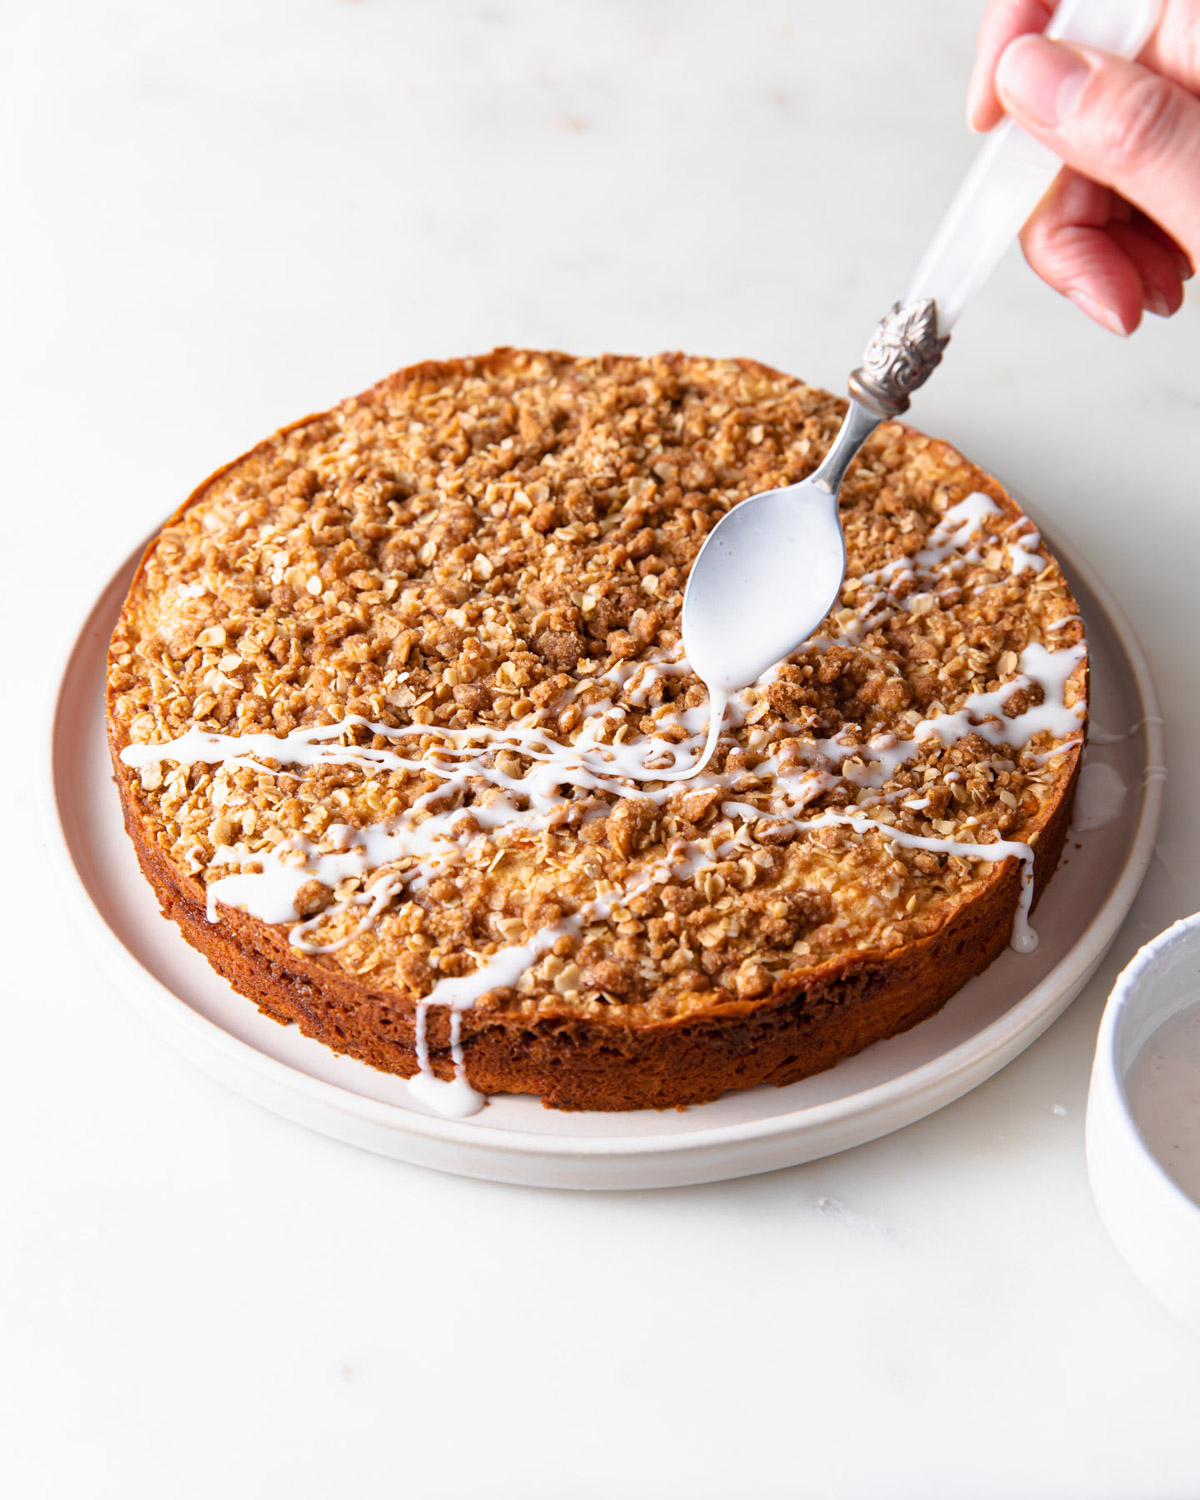 A spoon drizzling glaze on a carrot coffee cake